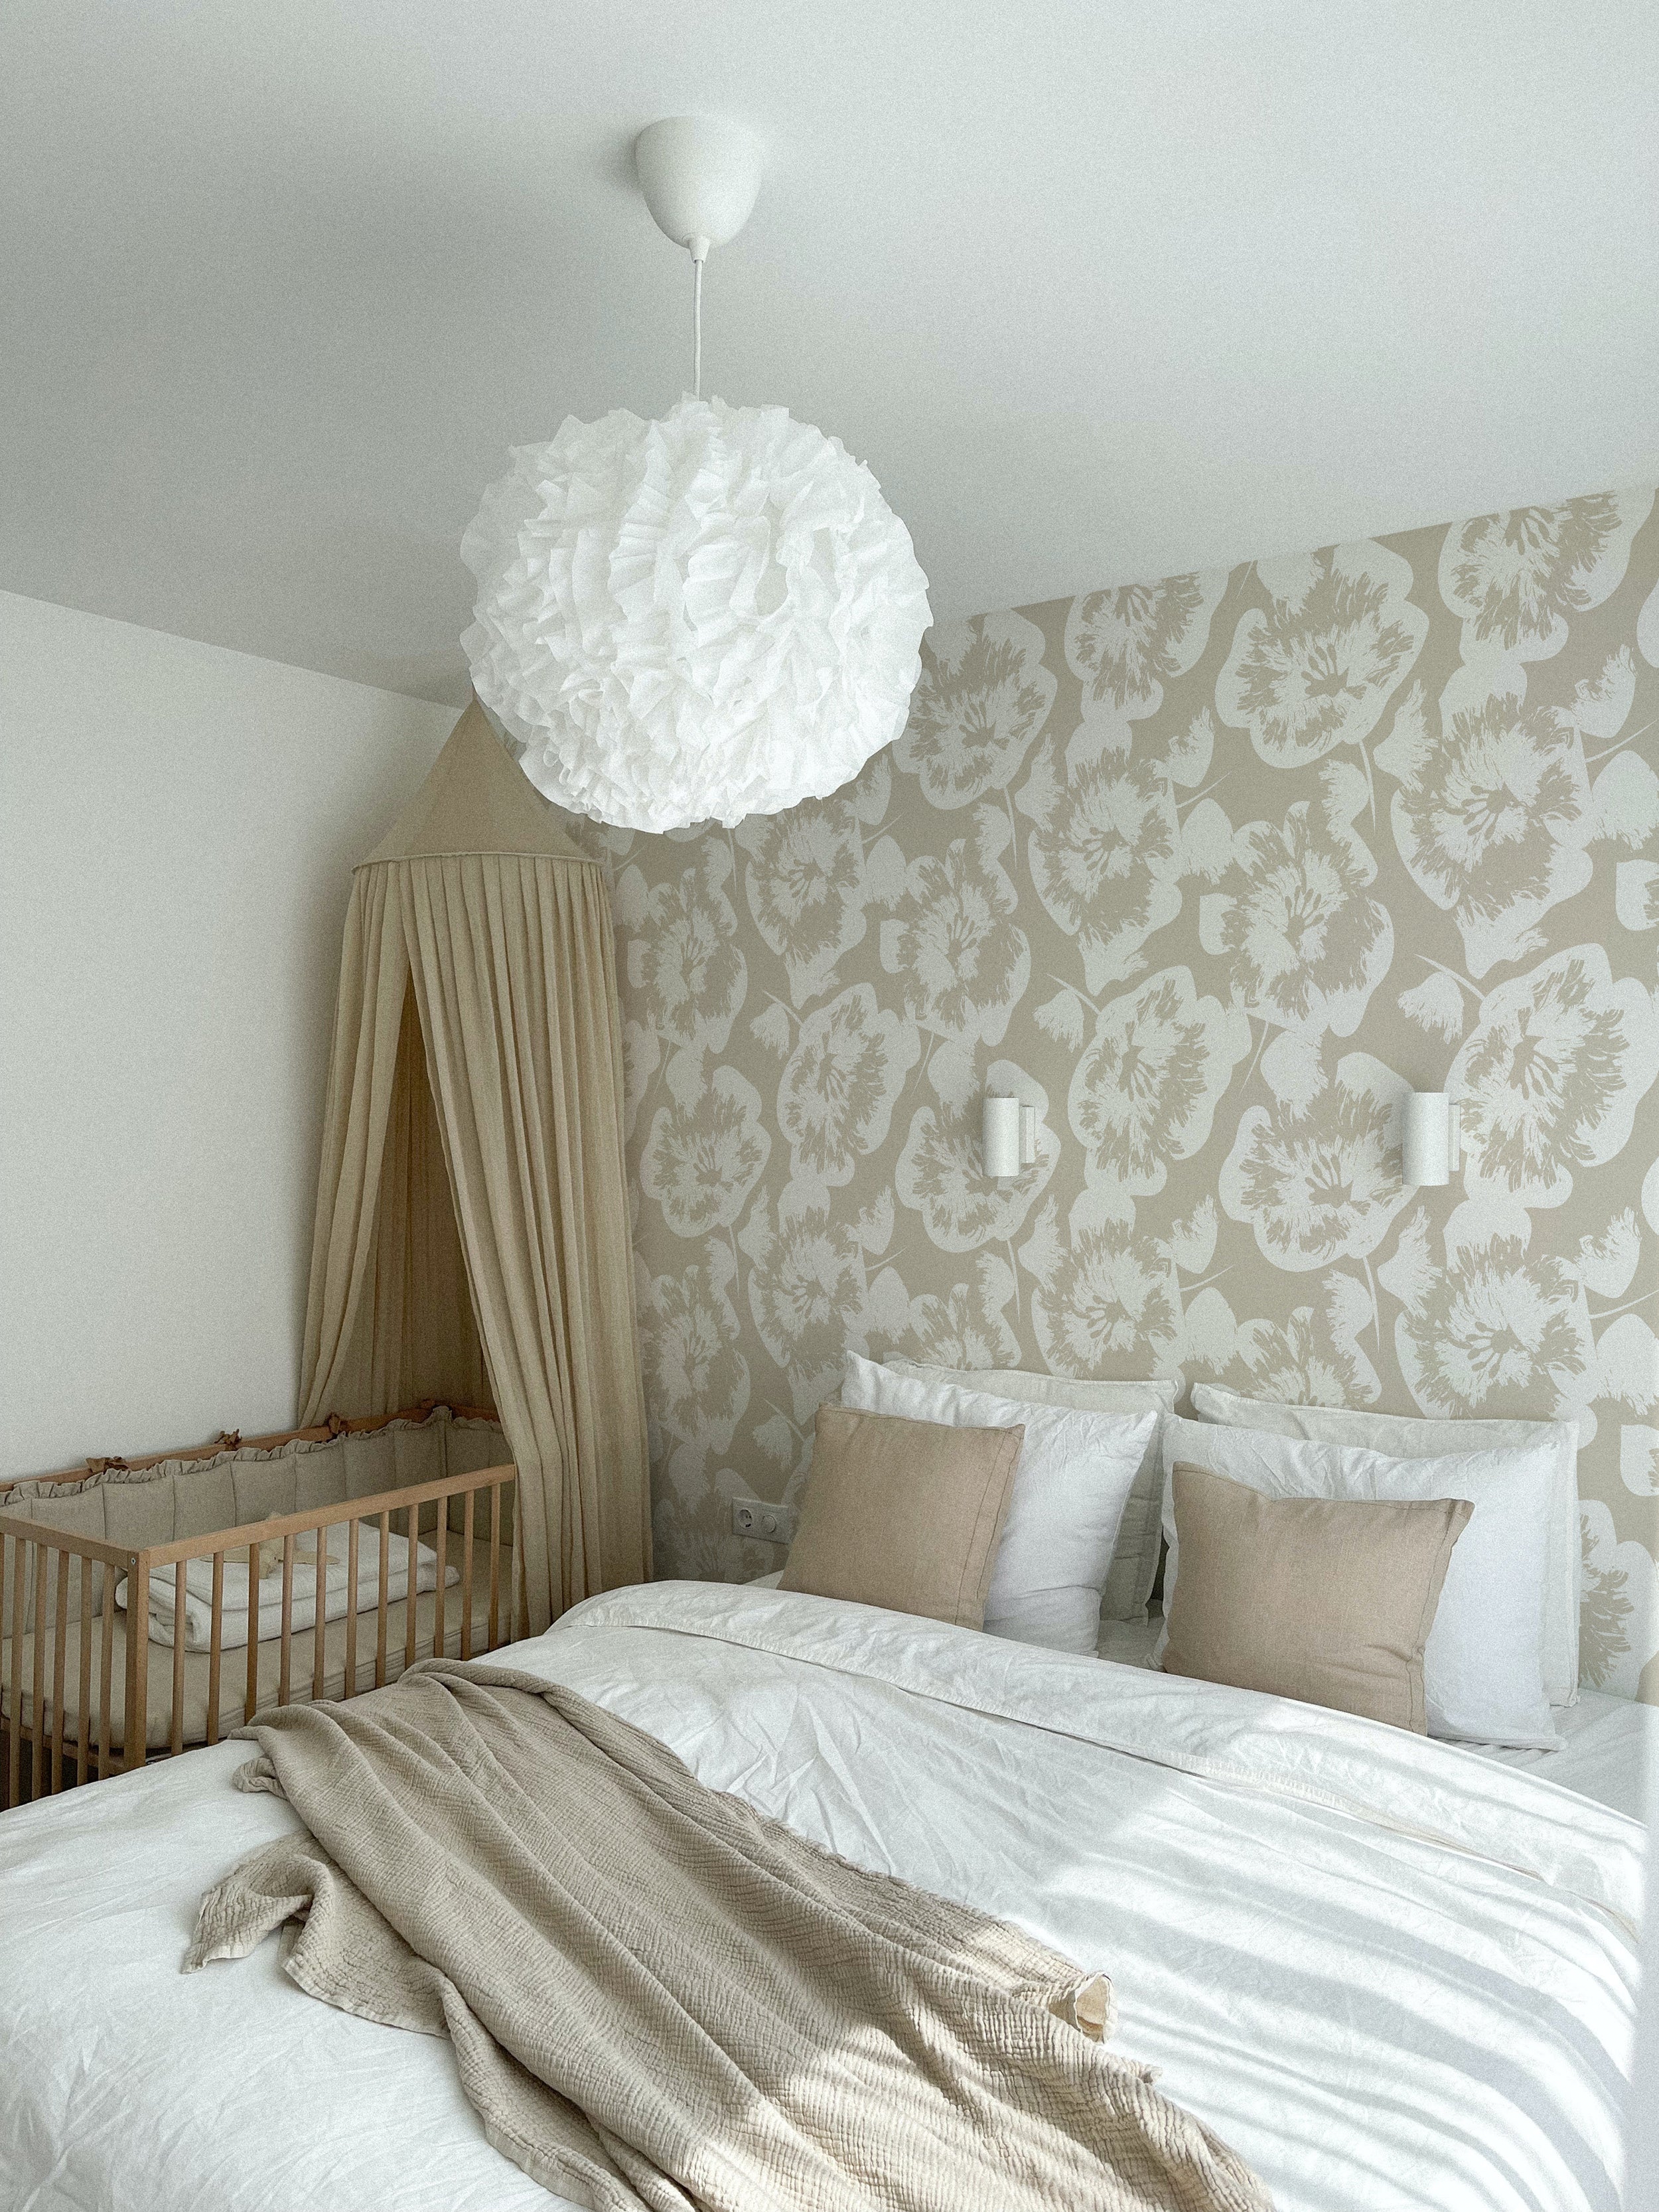 A serene bedroom showcasing the Stamped Floral Wallpaper, where large stylized floral prints in beige provide a soft, romantic touch. The room is furnished with a bed and a crib, unified by the wallpaper's calming presence and a chic white flower-shaped ceiling lamp